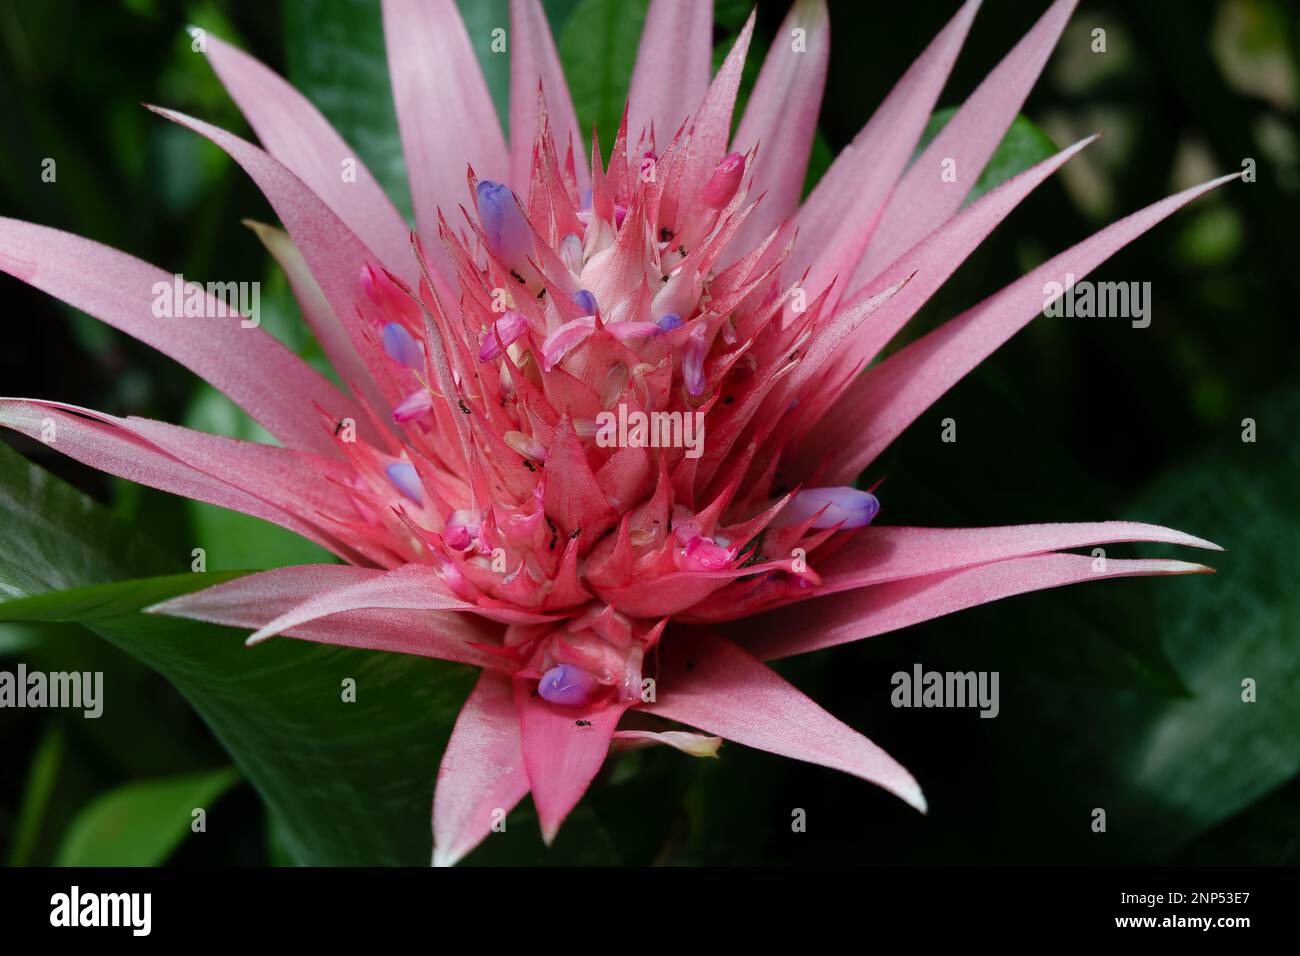 Pink and blue closeup of an exotic tropical, bromeliad flower fully open. Stock Photo